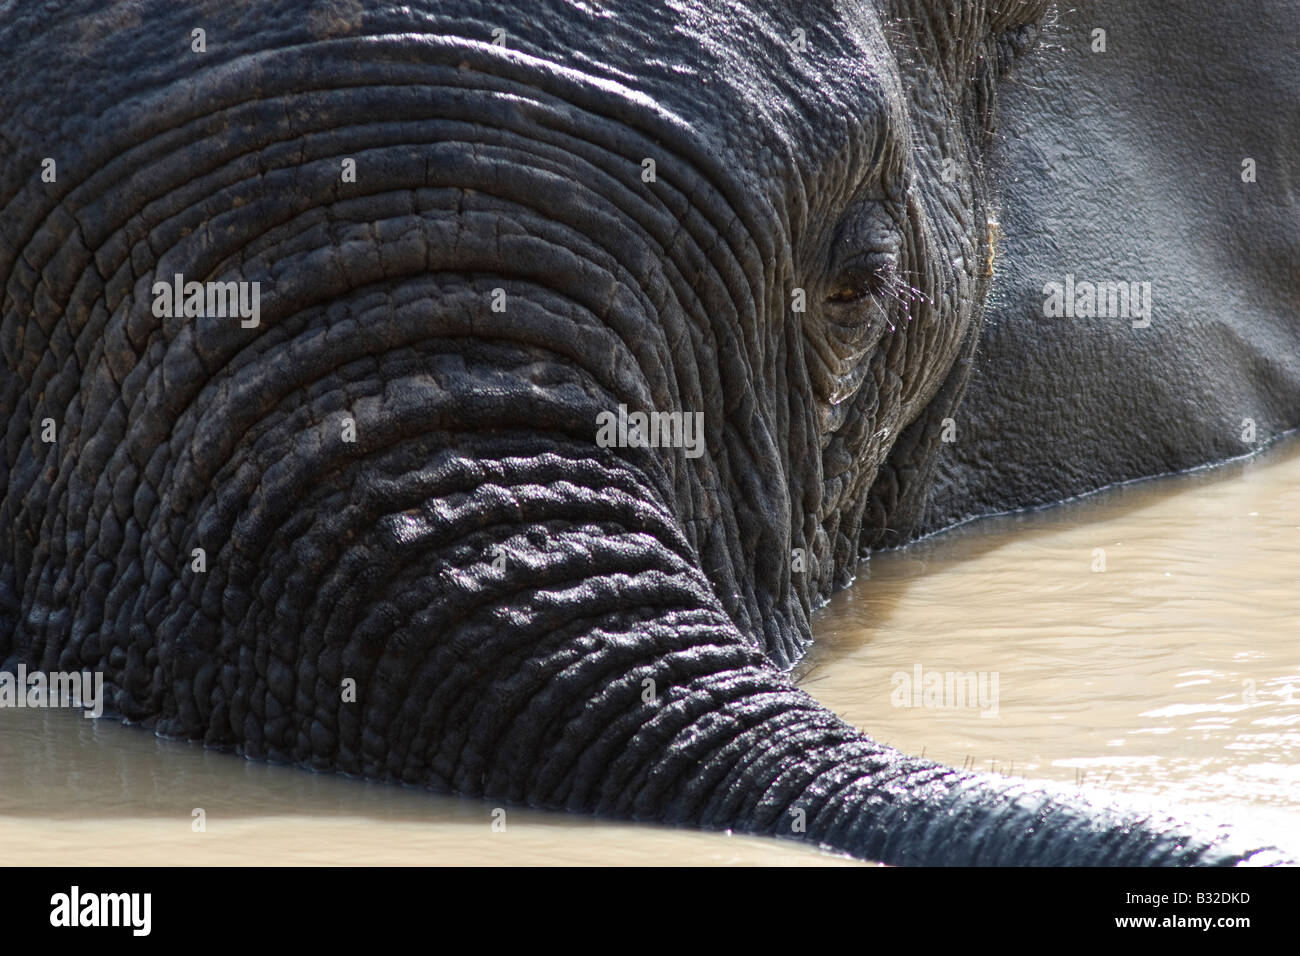 Elephant in water hole in Mole National Park Ghana Stock Photo